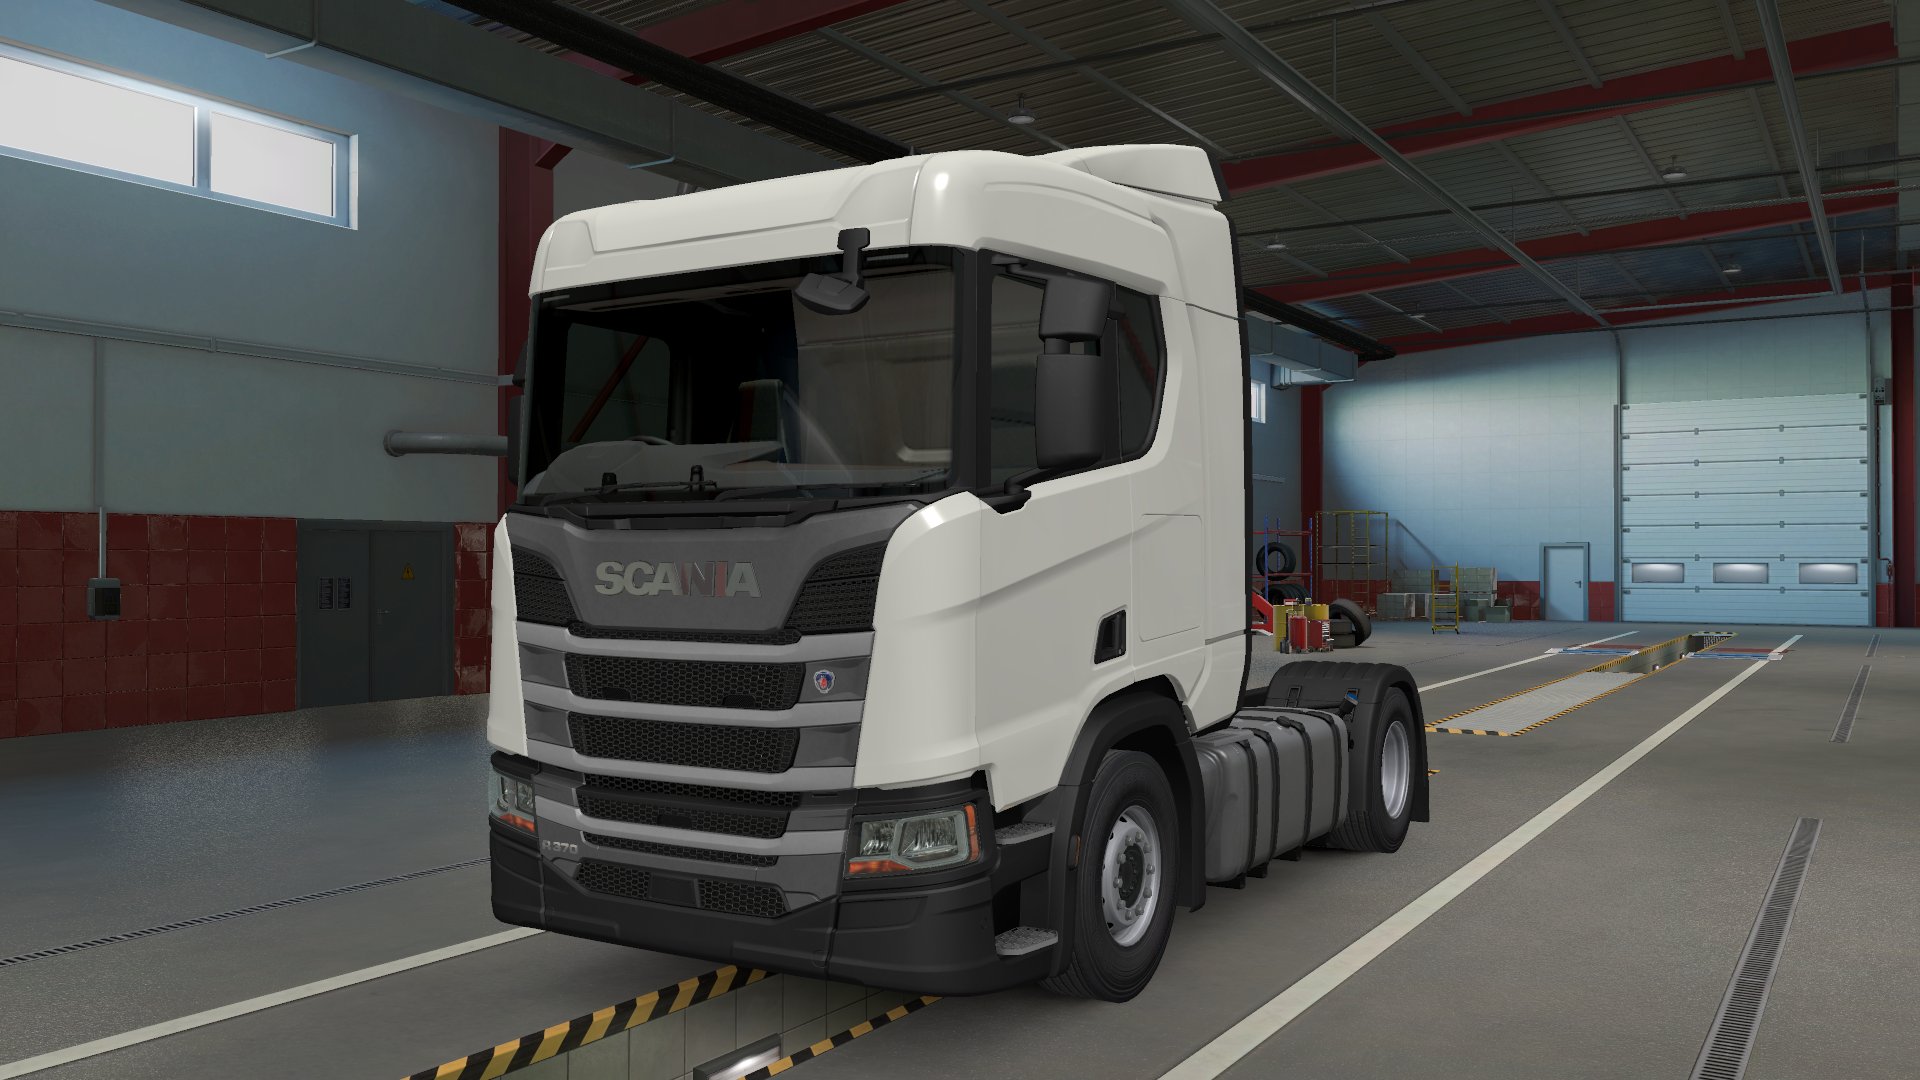 SCS on Twitter: "It's #TuneUpTuesday 🔧 Show us how can this Scania in Euro Truck Simulator 2 with your best accessories, paintjobs etc &amp; we will feature our favorite